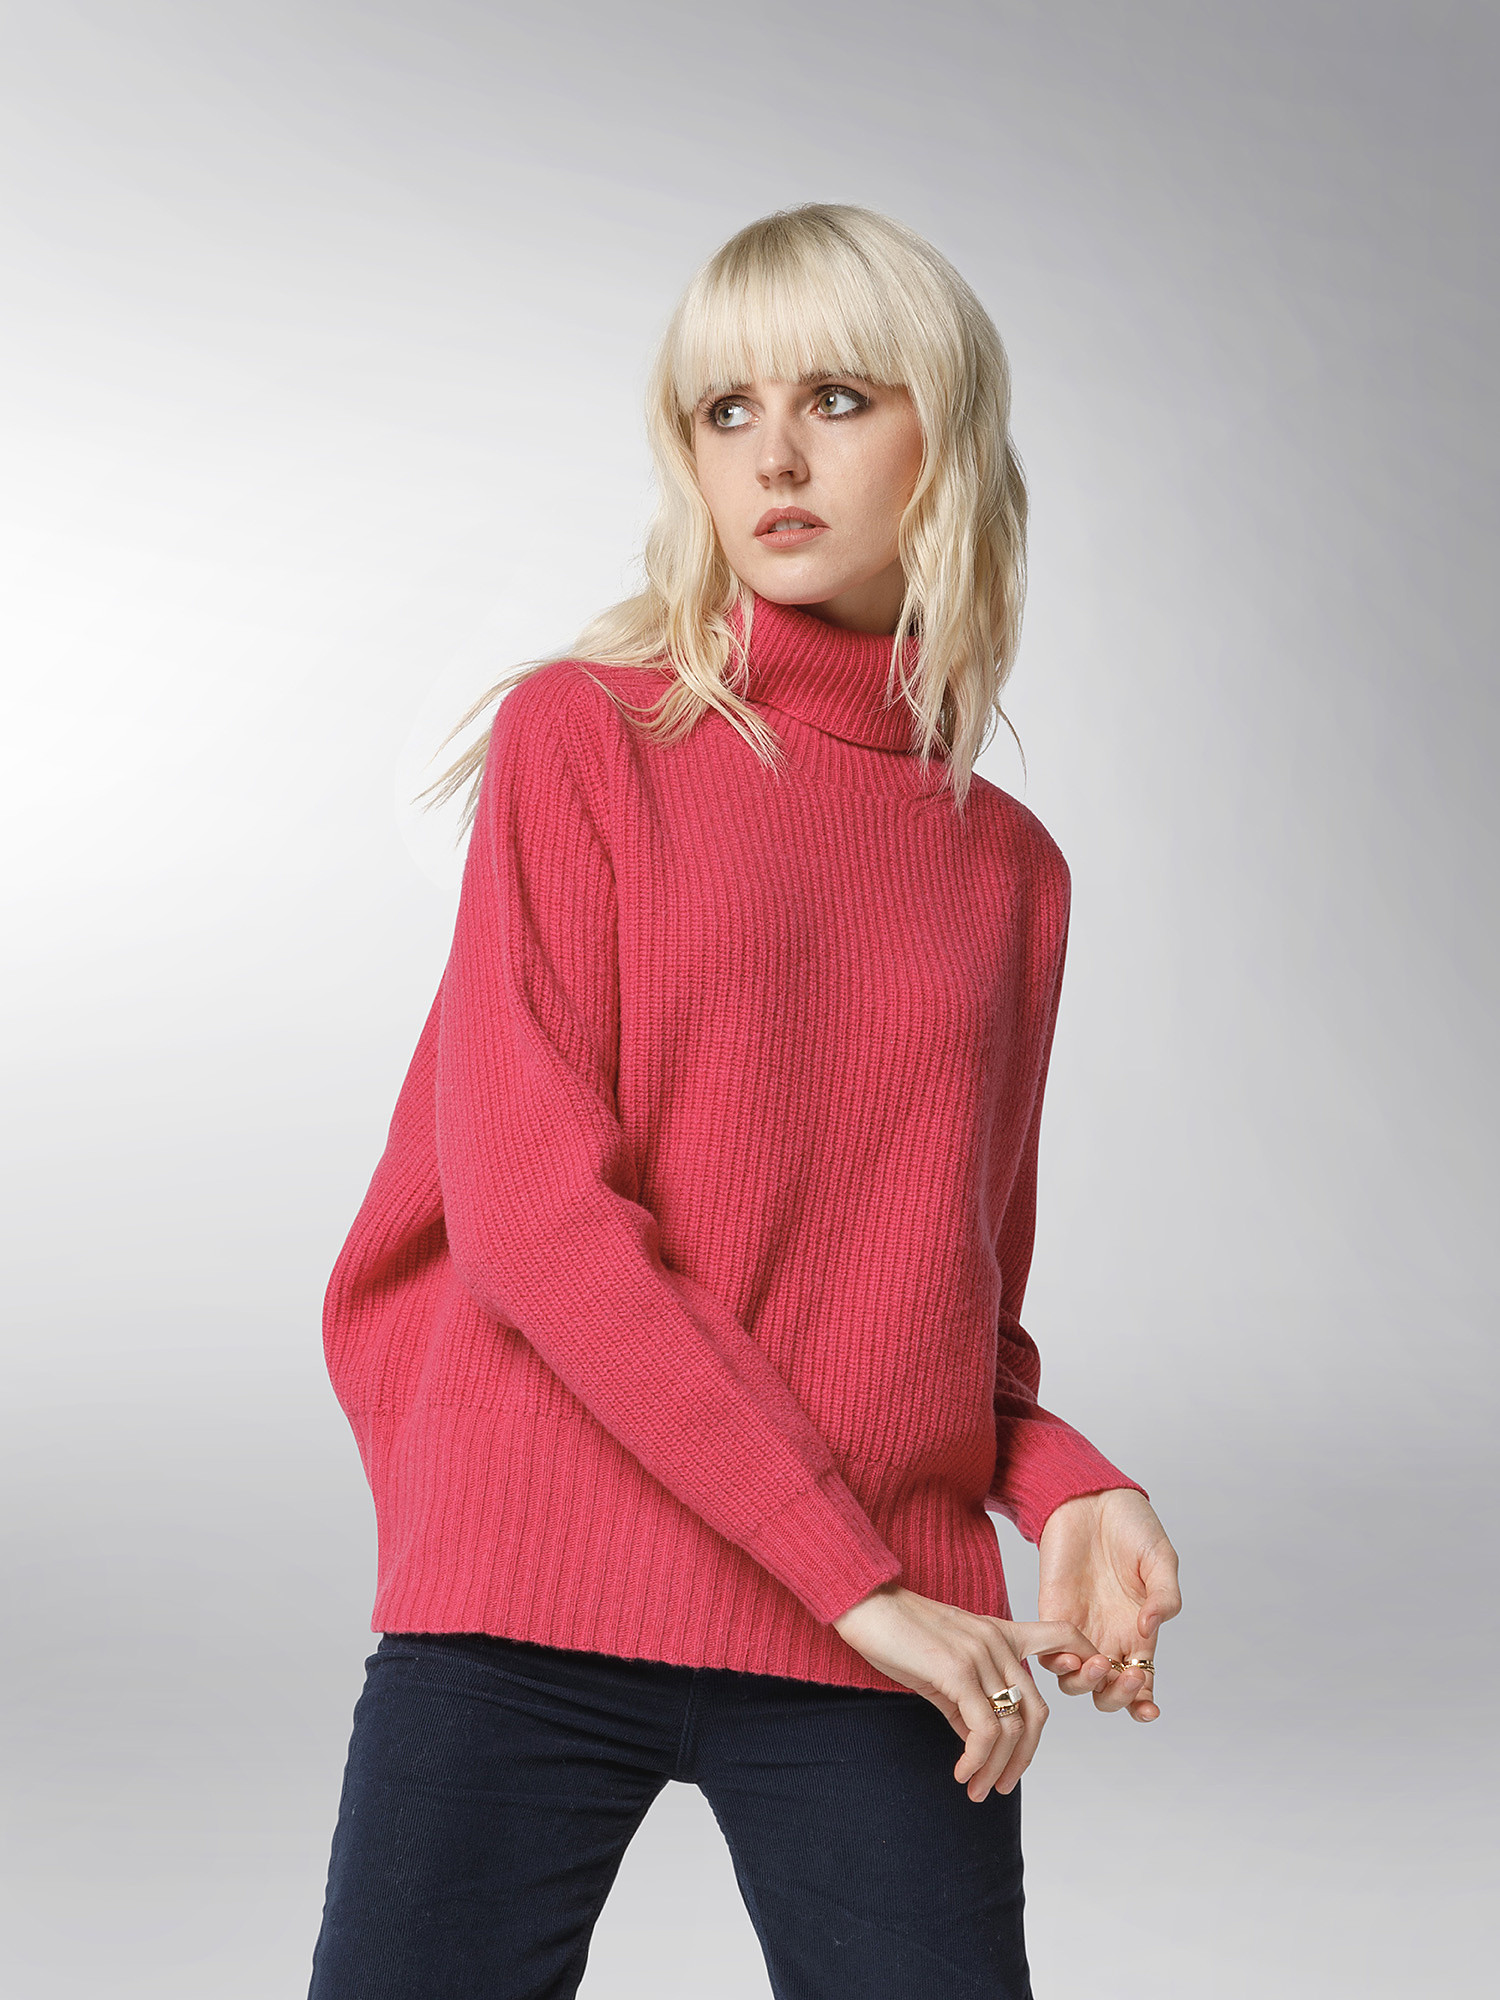 K Collection - Carded wool turtleneck pullover, Pink Fuchsia, large image number 4